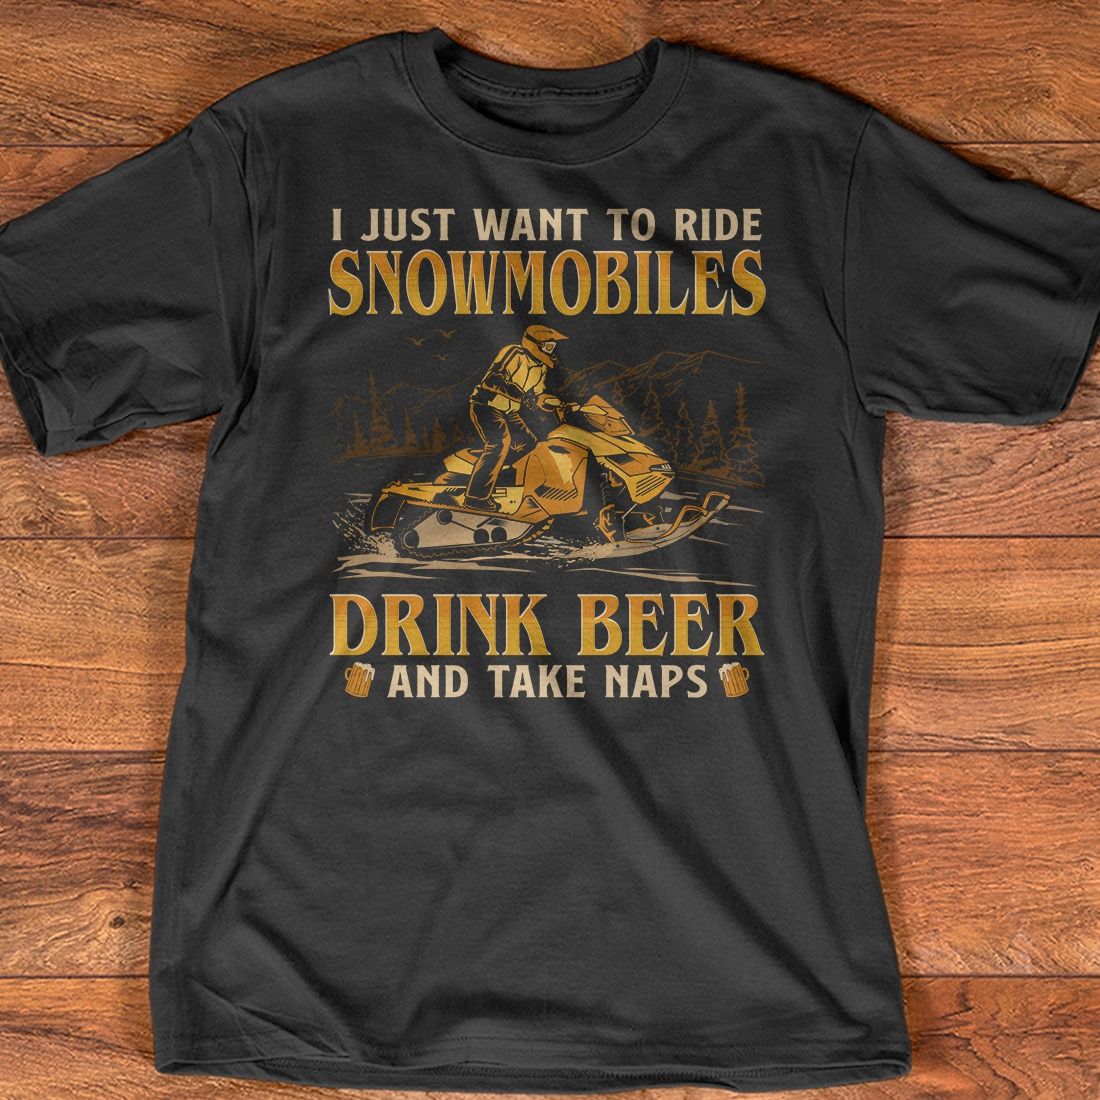 Man Love Snowmobiles And Drink Beer - I just want to ride snowmobiles drink beer and take naps